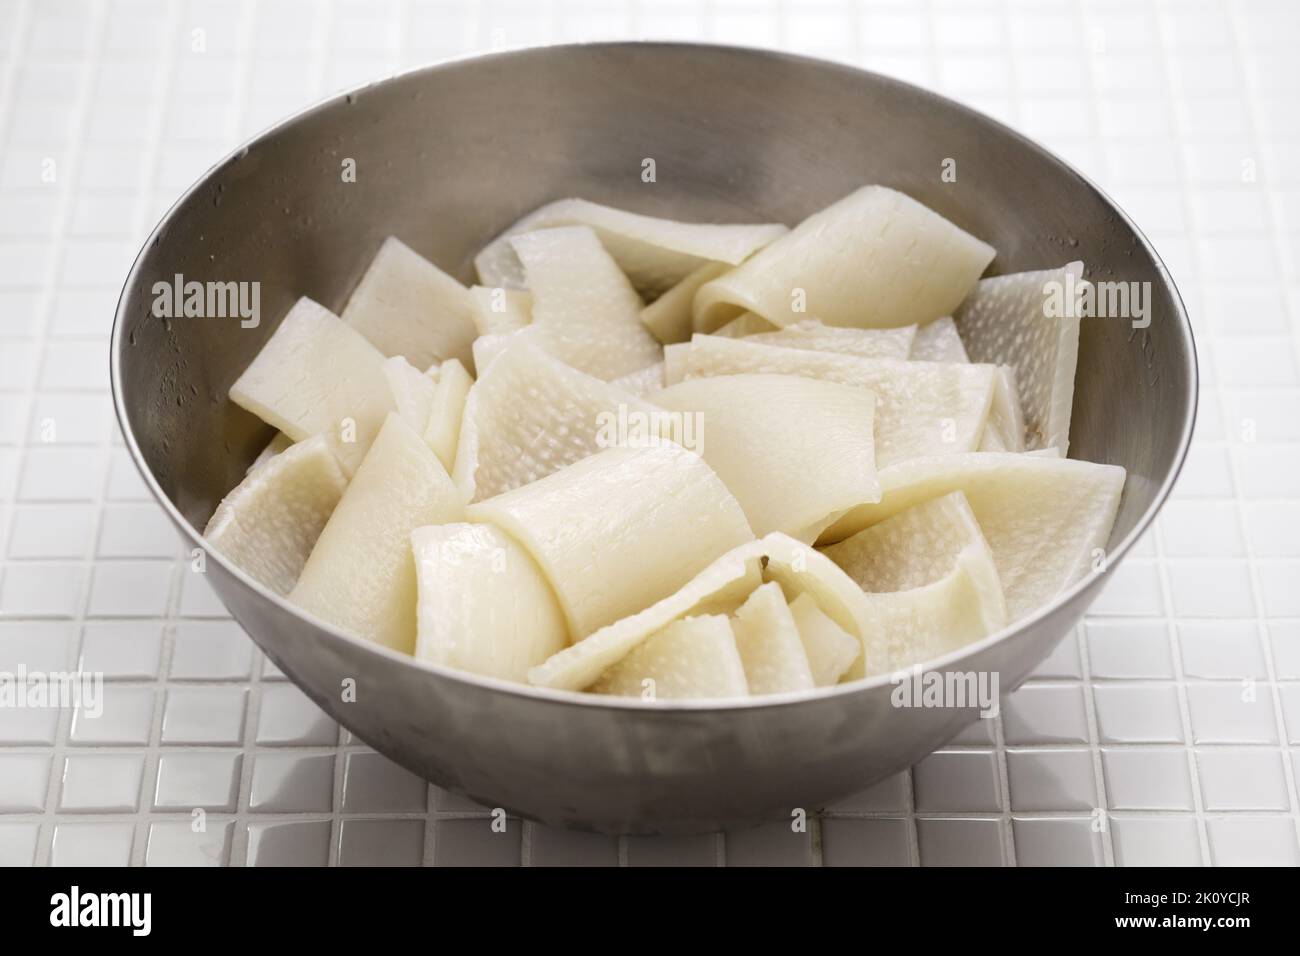 Pork rinds in a bowl. Ingredients for Cueritos (Mexican vinegared pickled pork rinds). Stock Photo